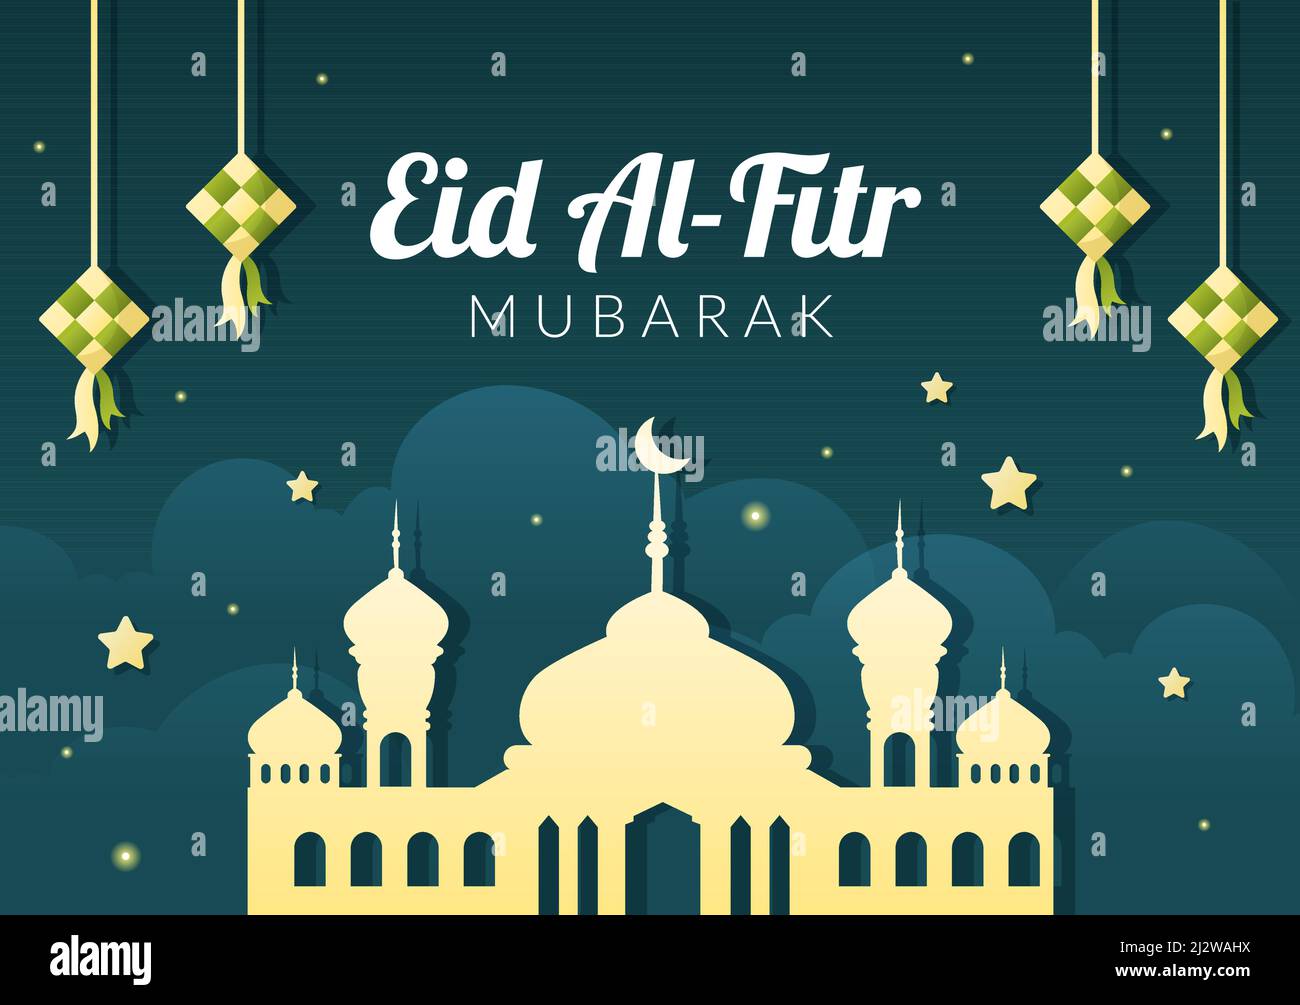 Happy Eid ul-Fitr Mubarak Background Illustration with Pictures of ...